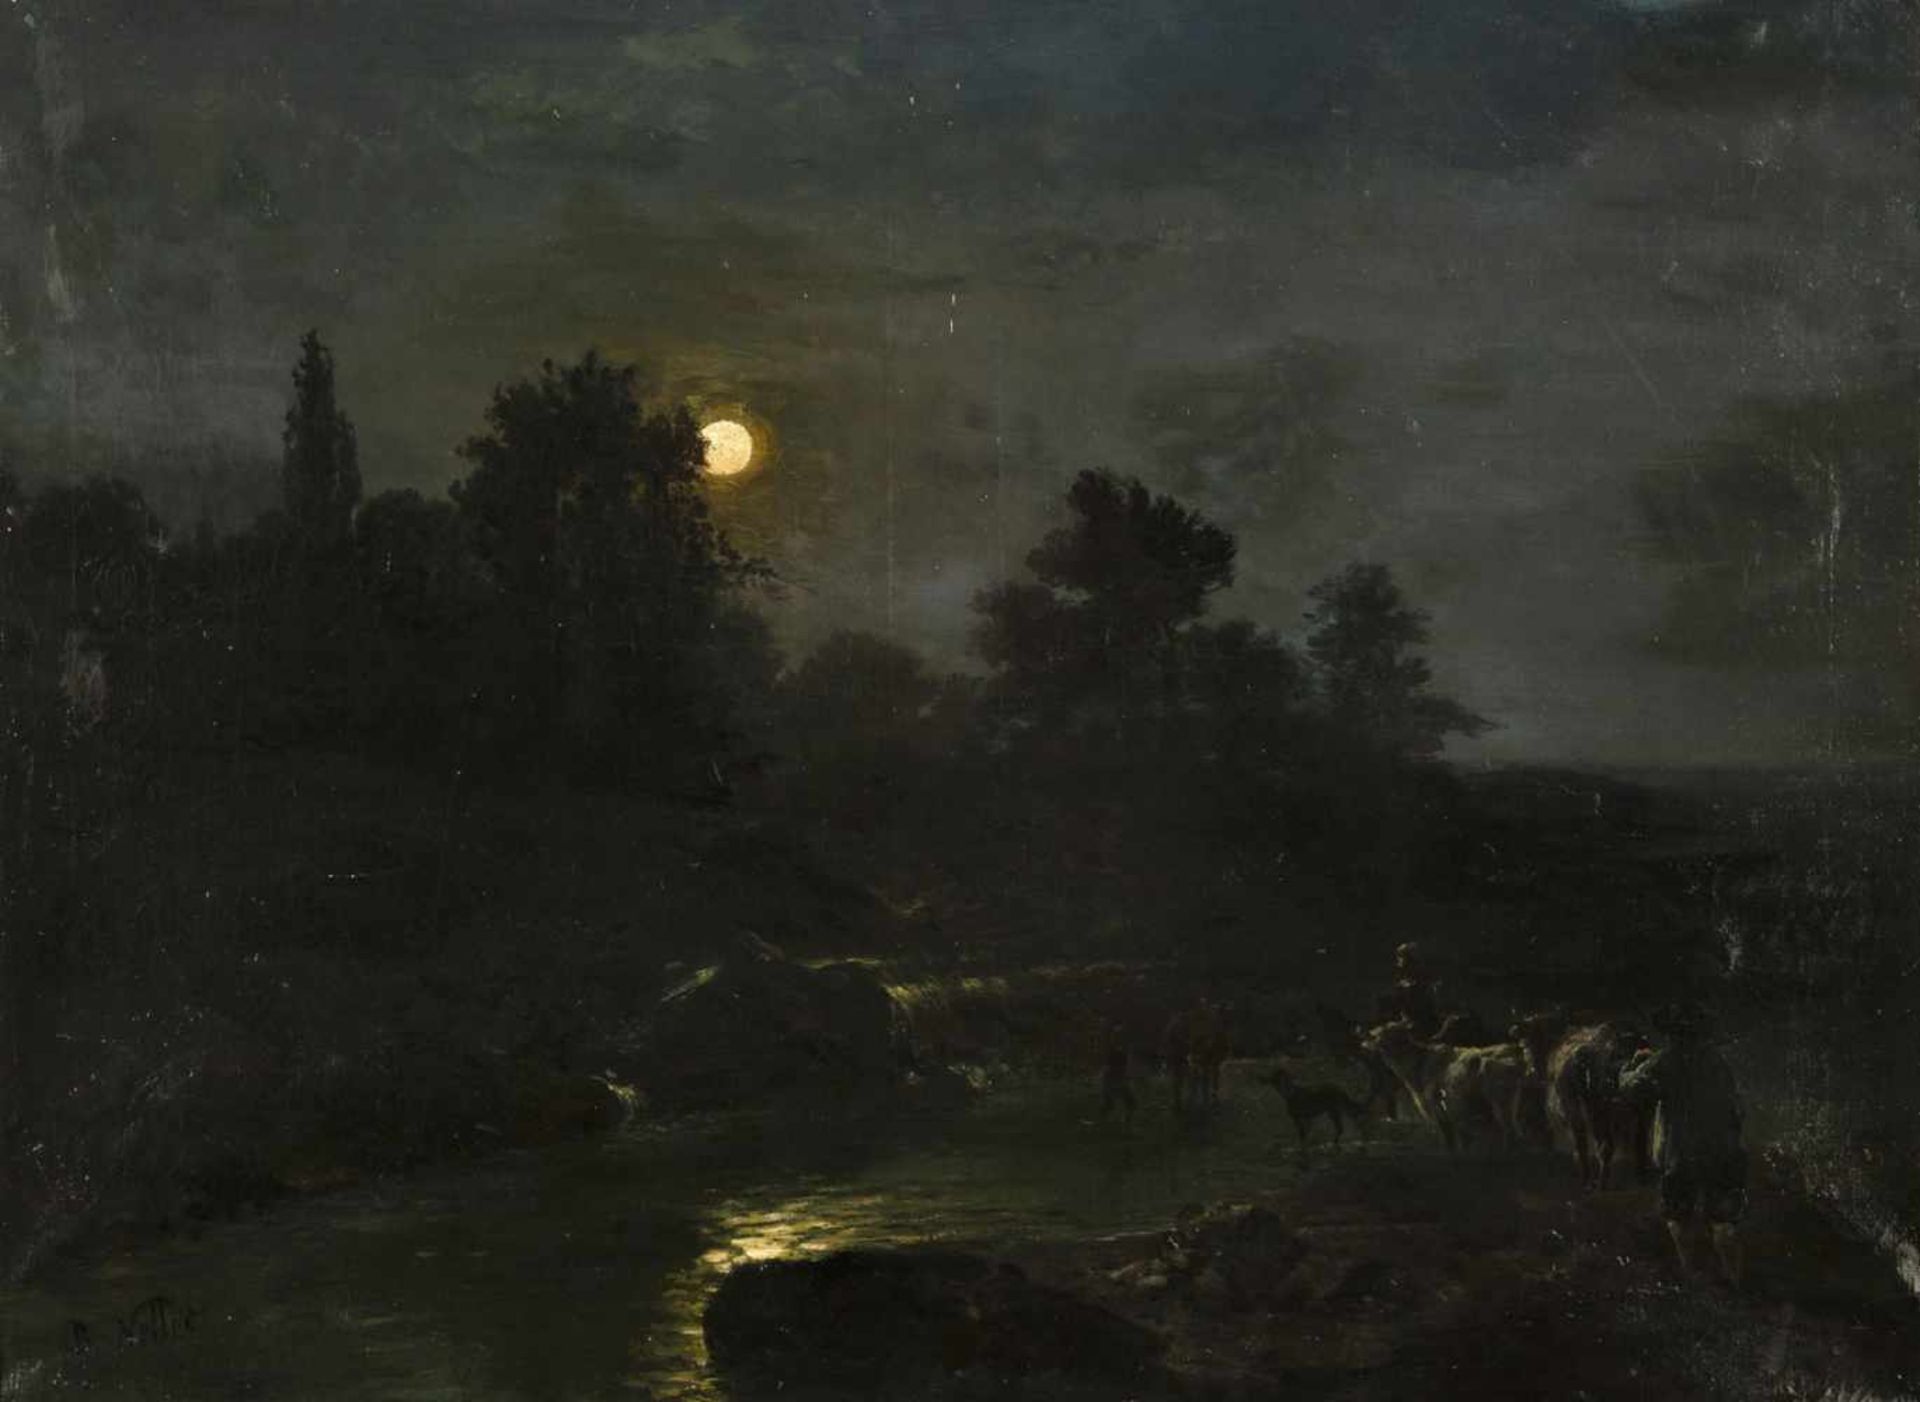 NETTER, BENJAMIN (1811-1881). Landscape at moonlight with a peasant family fording a river. Oil/